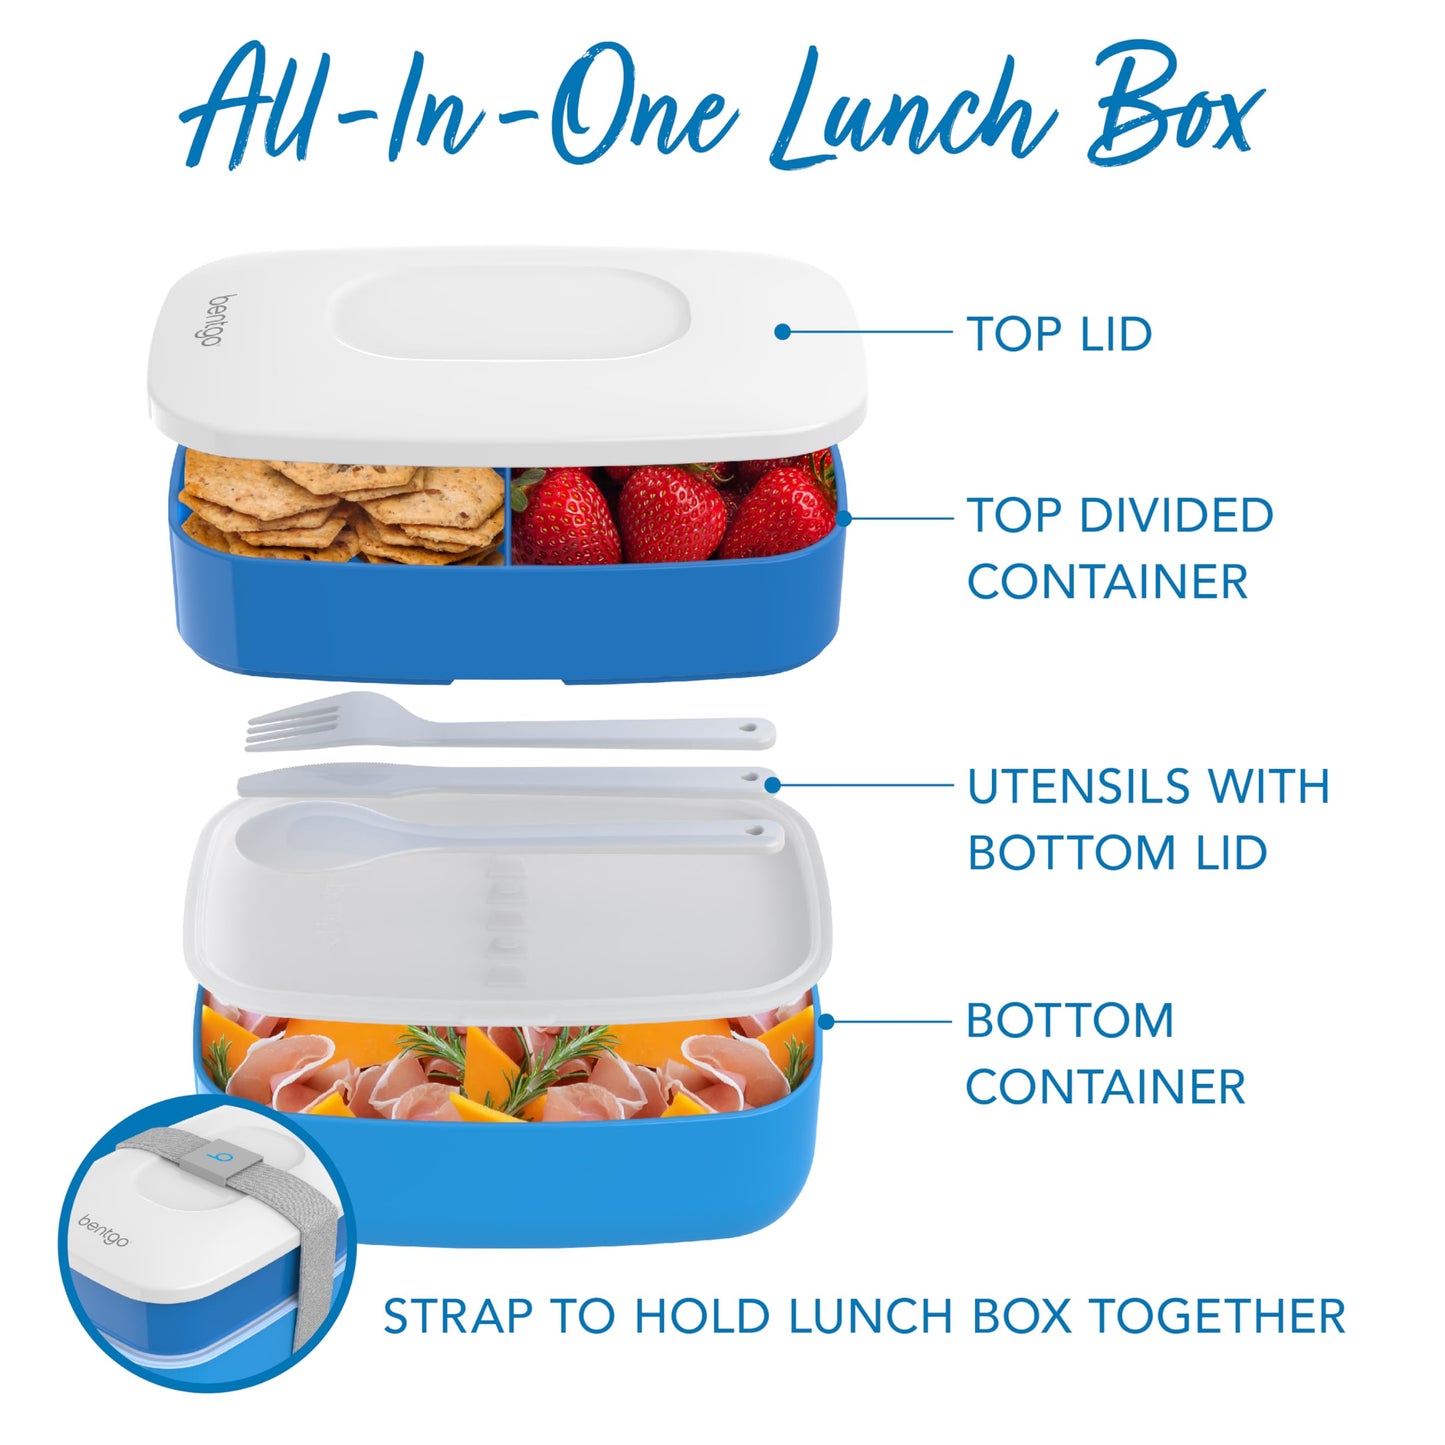 Bentgo® Classic - Adult Bento Box, All-in-One Stackable Lunch Box Container with 3 Compartments, Plastic Utensils, and Nylon Sealing Strap, BPA Free Food Container (Blue)